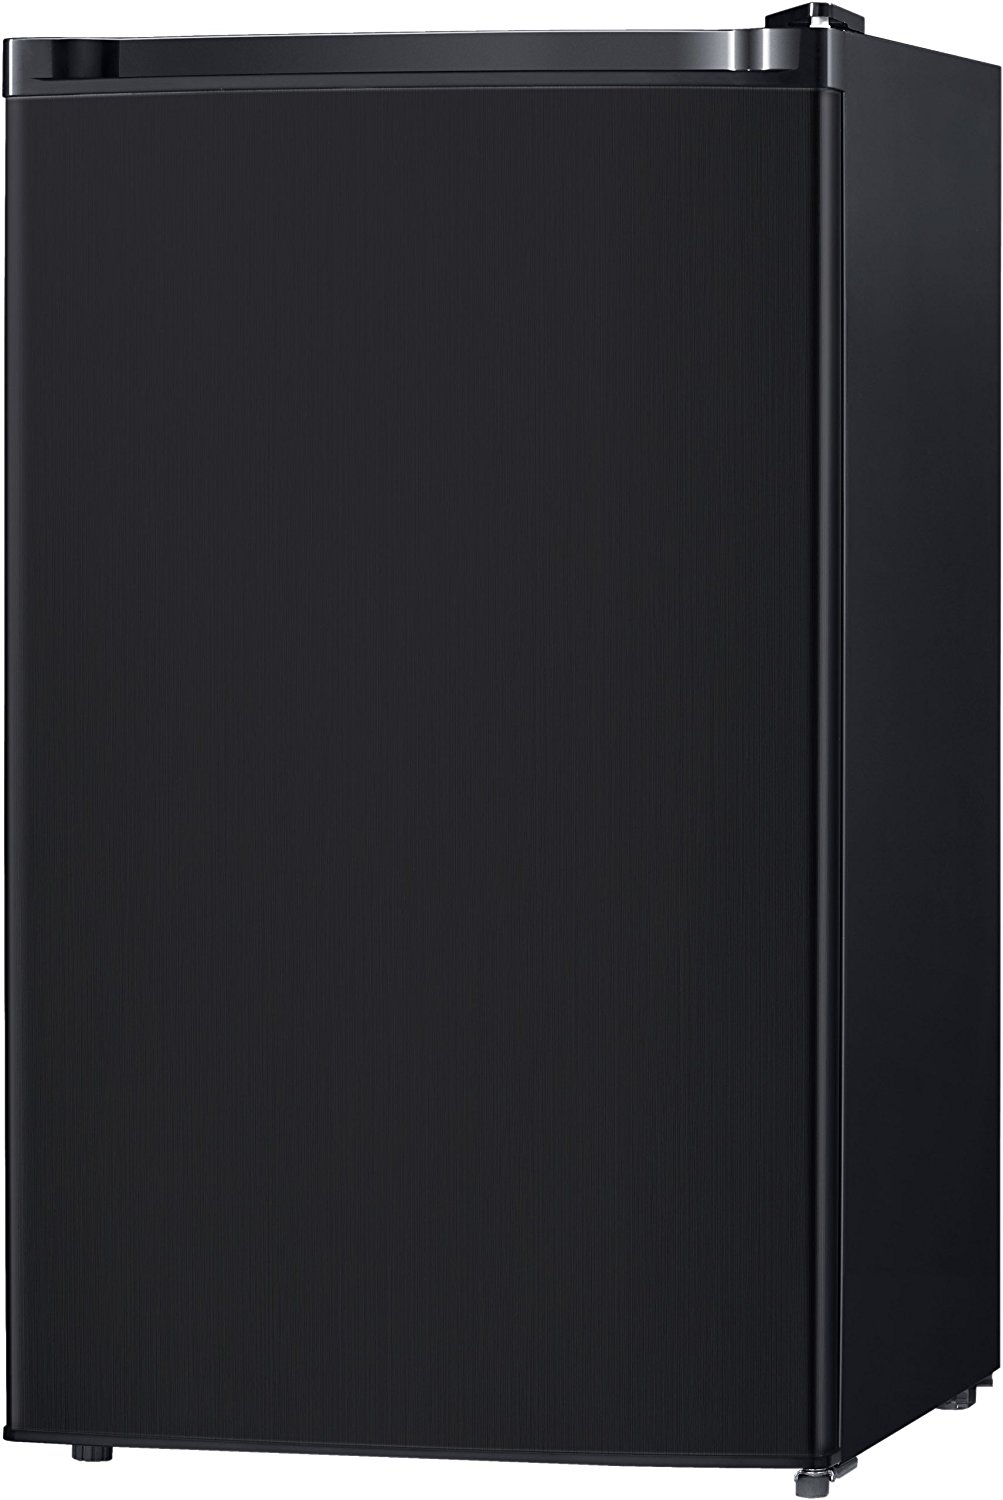 Midea WHS-160RB1 Compact Single Reversible Door Refrigerator and Freezer, 4.4 Cubic Feet, Black